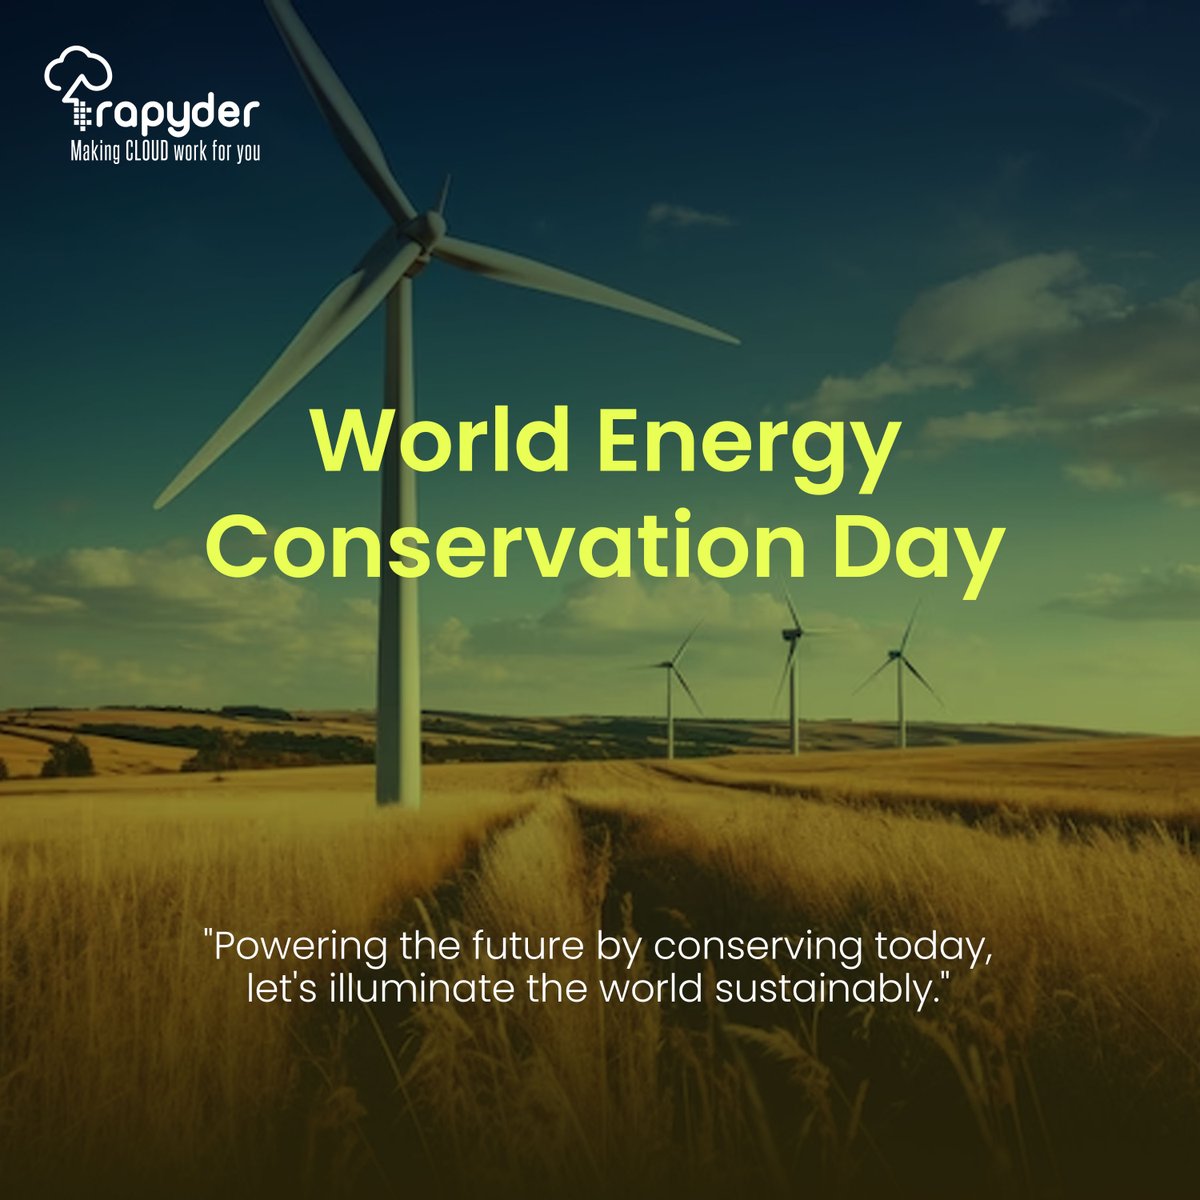 Celebrate a brighter and sustainable tomorrow by embracing energy efficiency and conservation on World Energy Conservation Day. #WorldEnergyConservationDay #Saveworld #energy